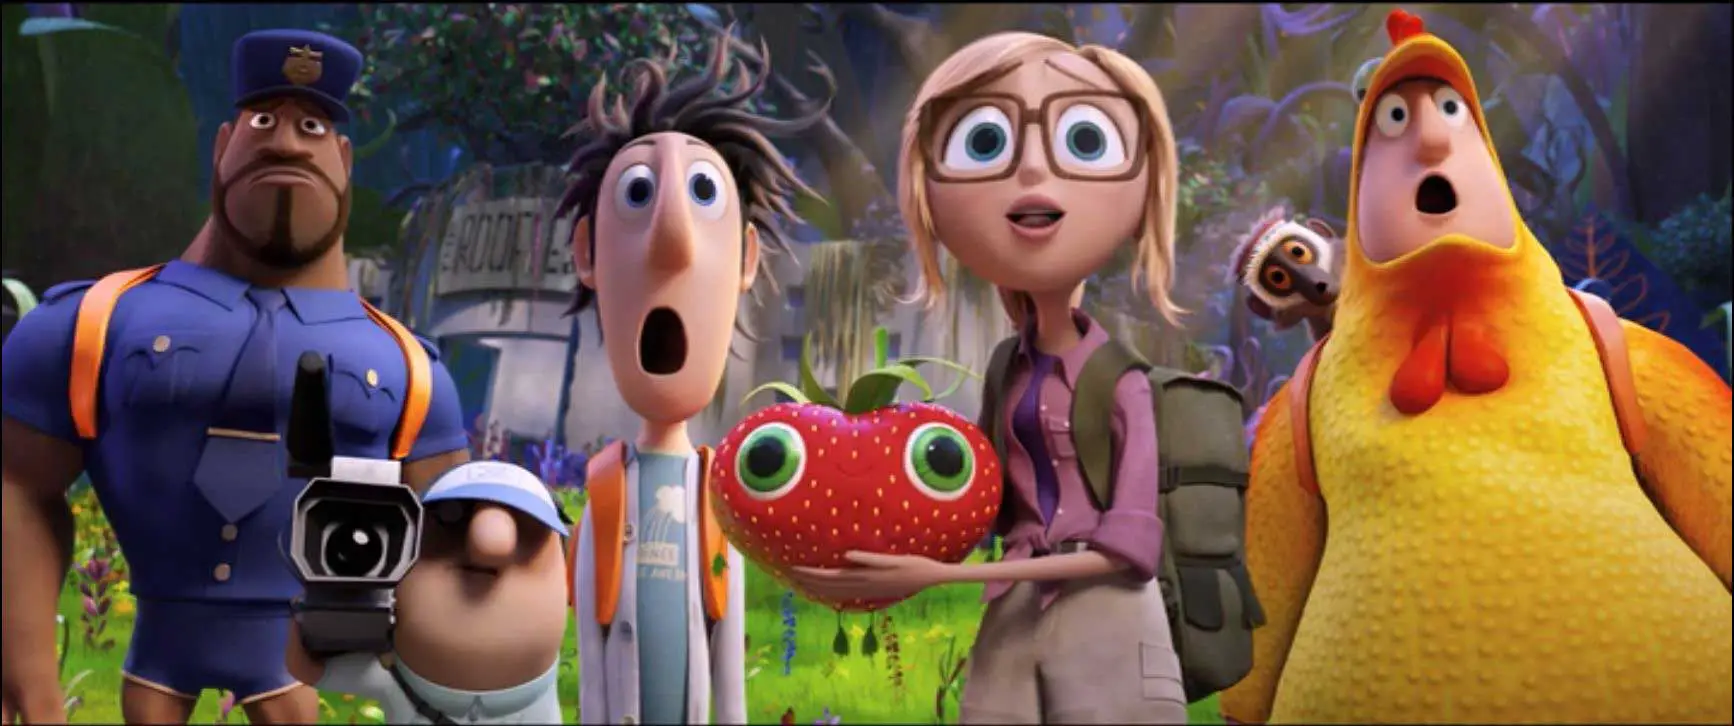 Cloudy with a Chance of Meatballs 2 | Free Download | Full ...